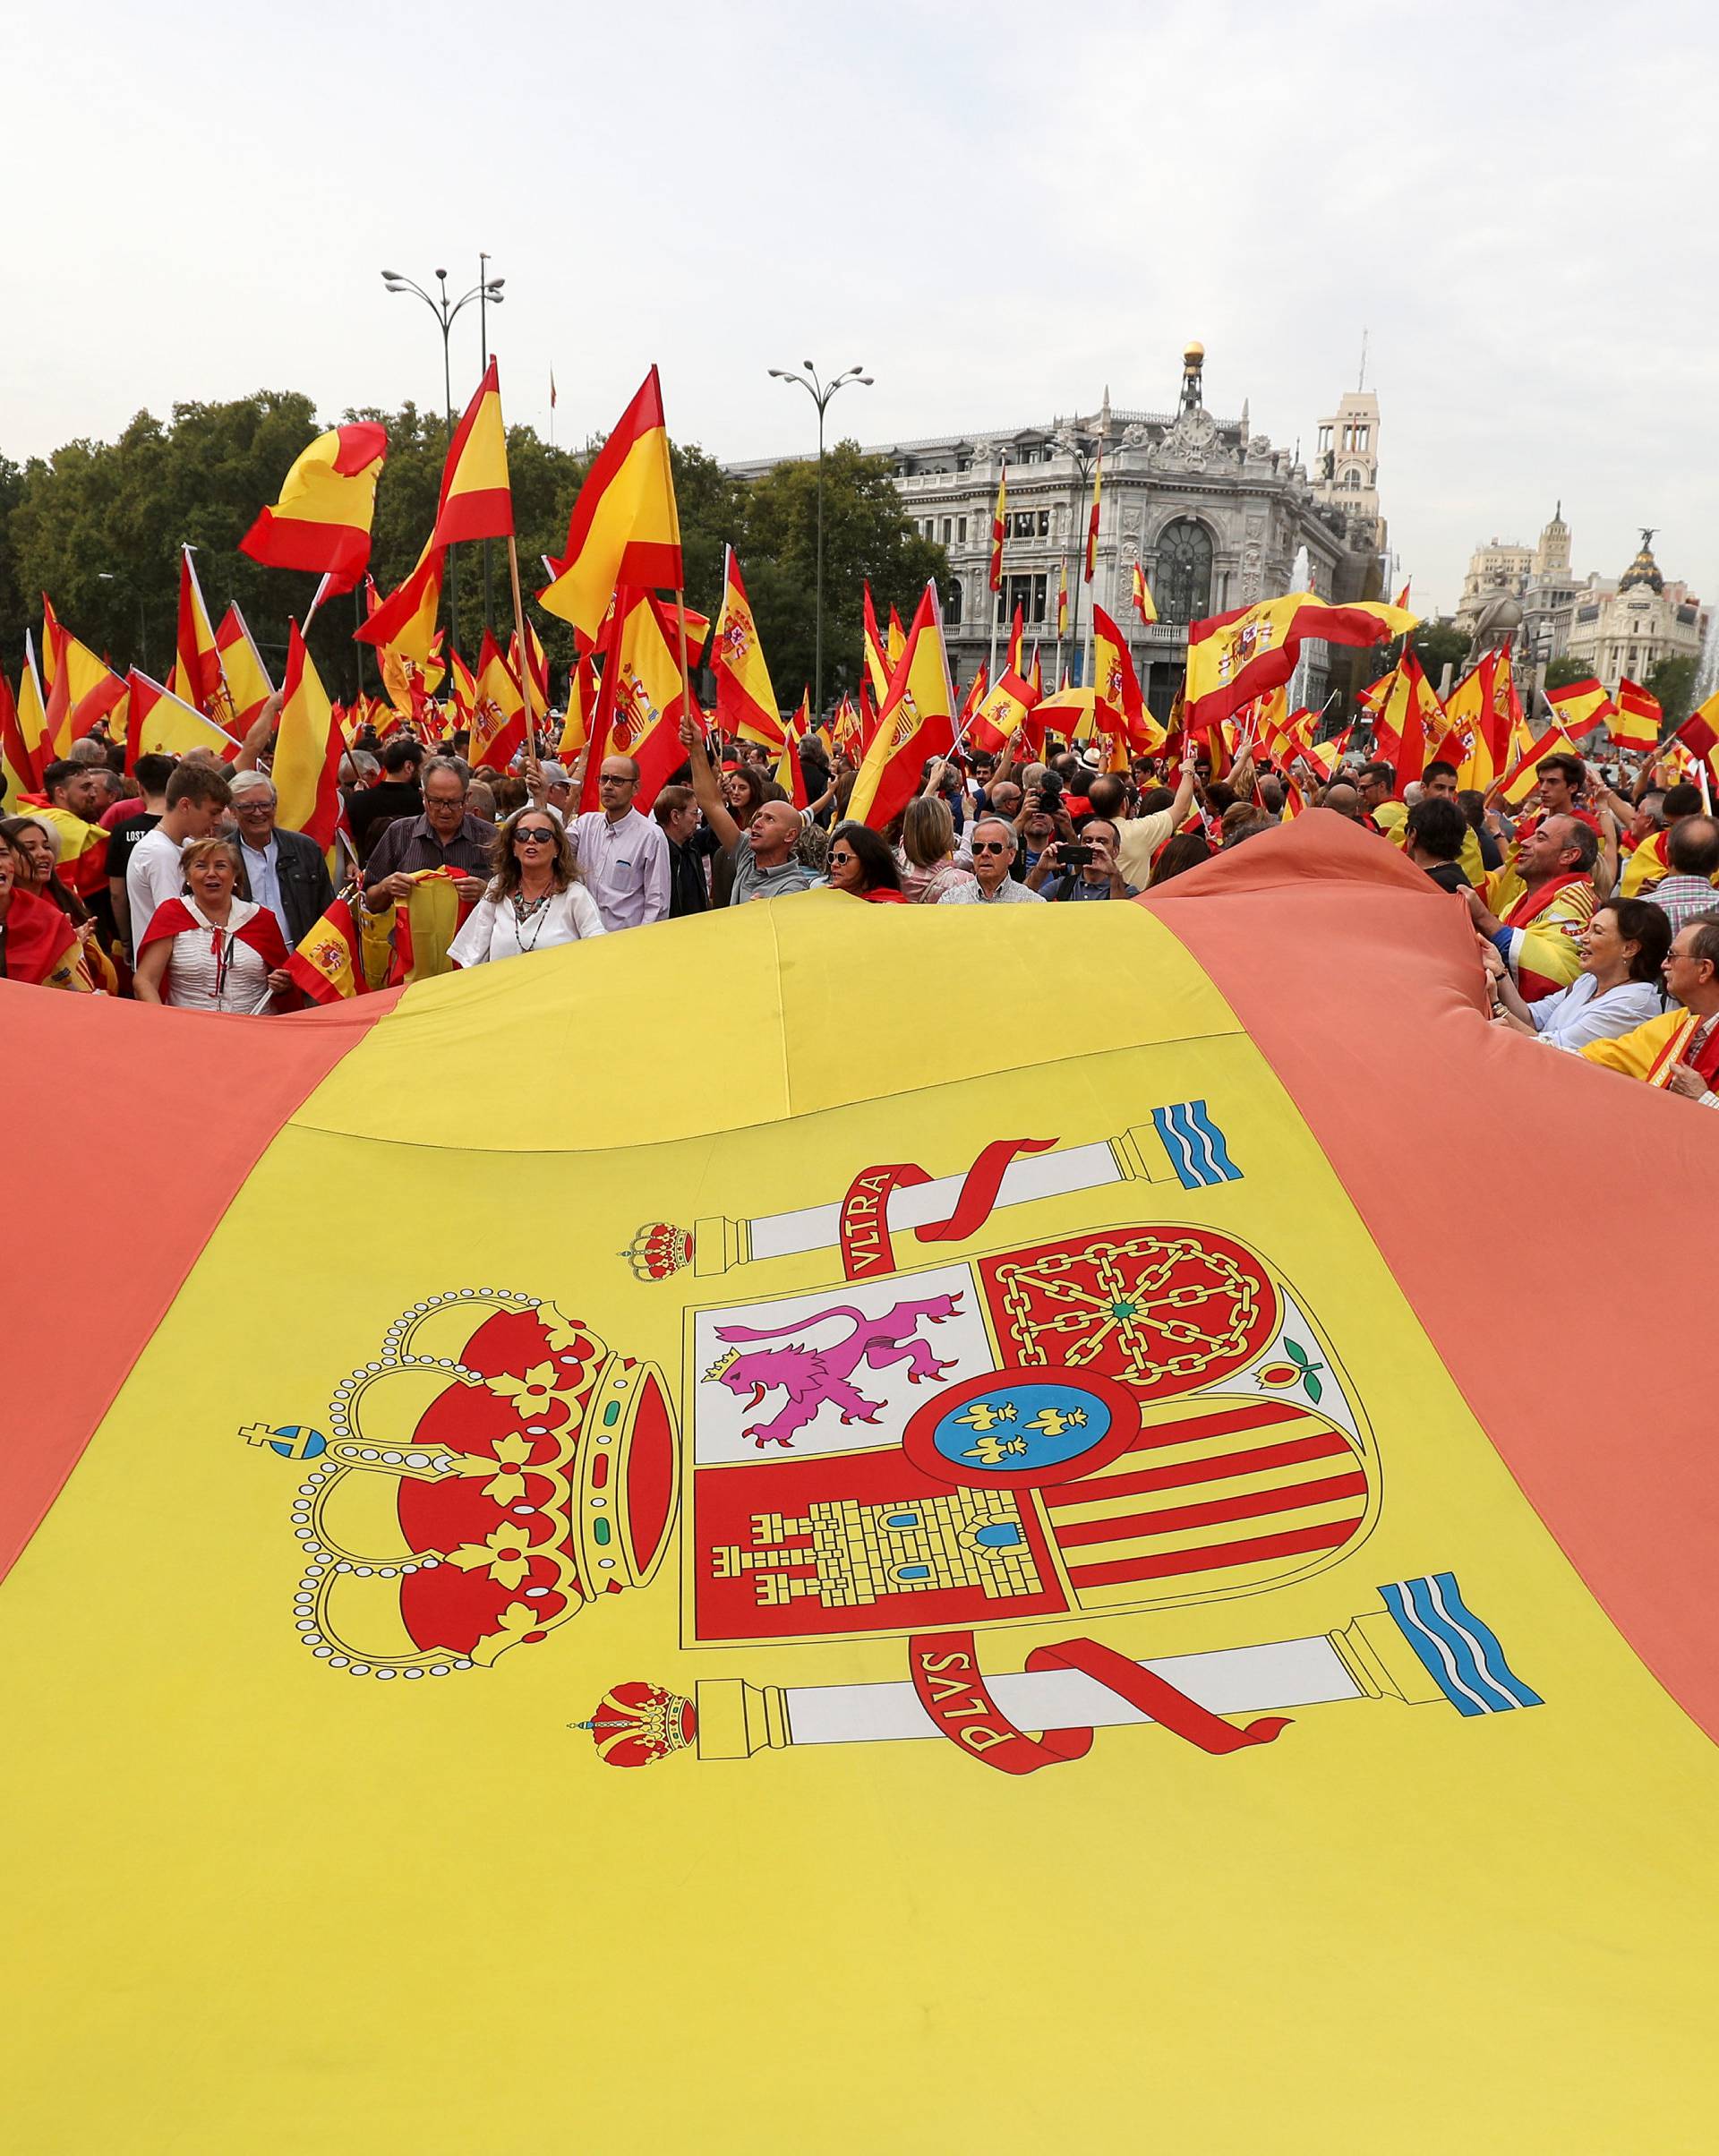 Demonstrators wave Spanish flags and shout in front of city hall during a demonstration in favor of a unified Spain a day before the banned October 1 independence referendum, in Madrid